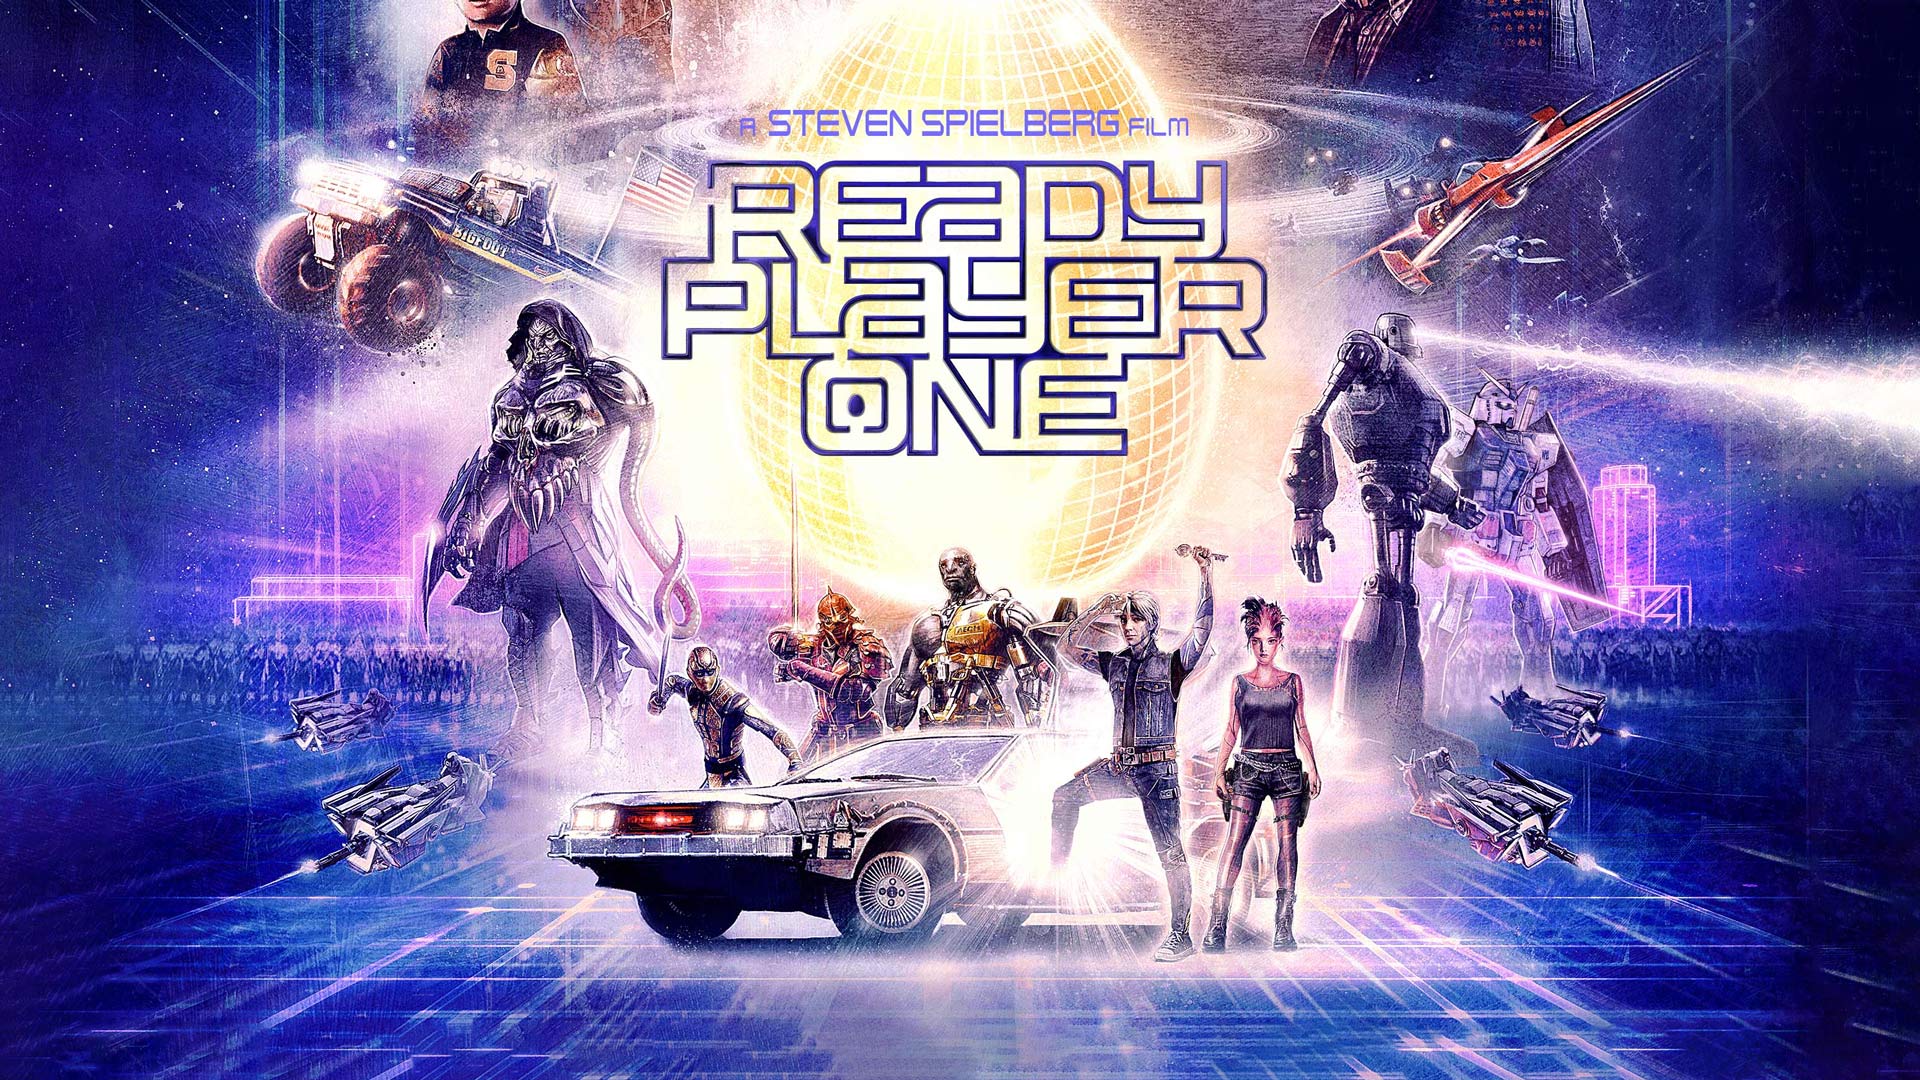 Every Ready Player One Trailer Released So Far